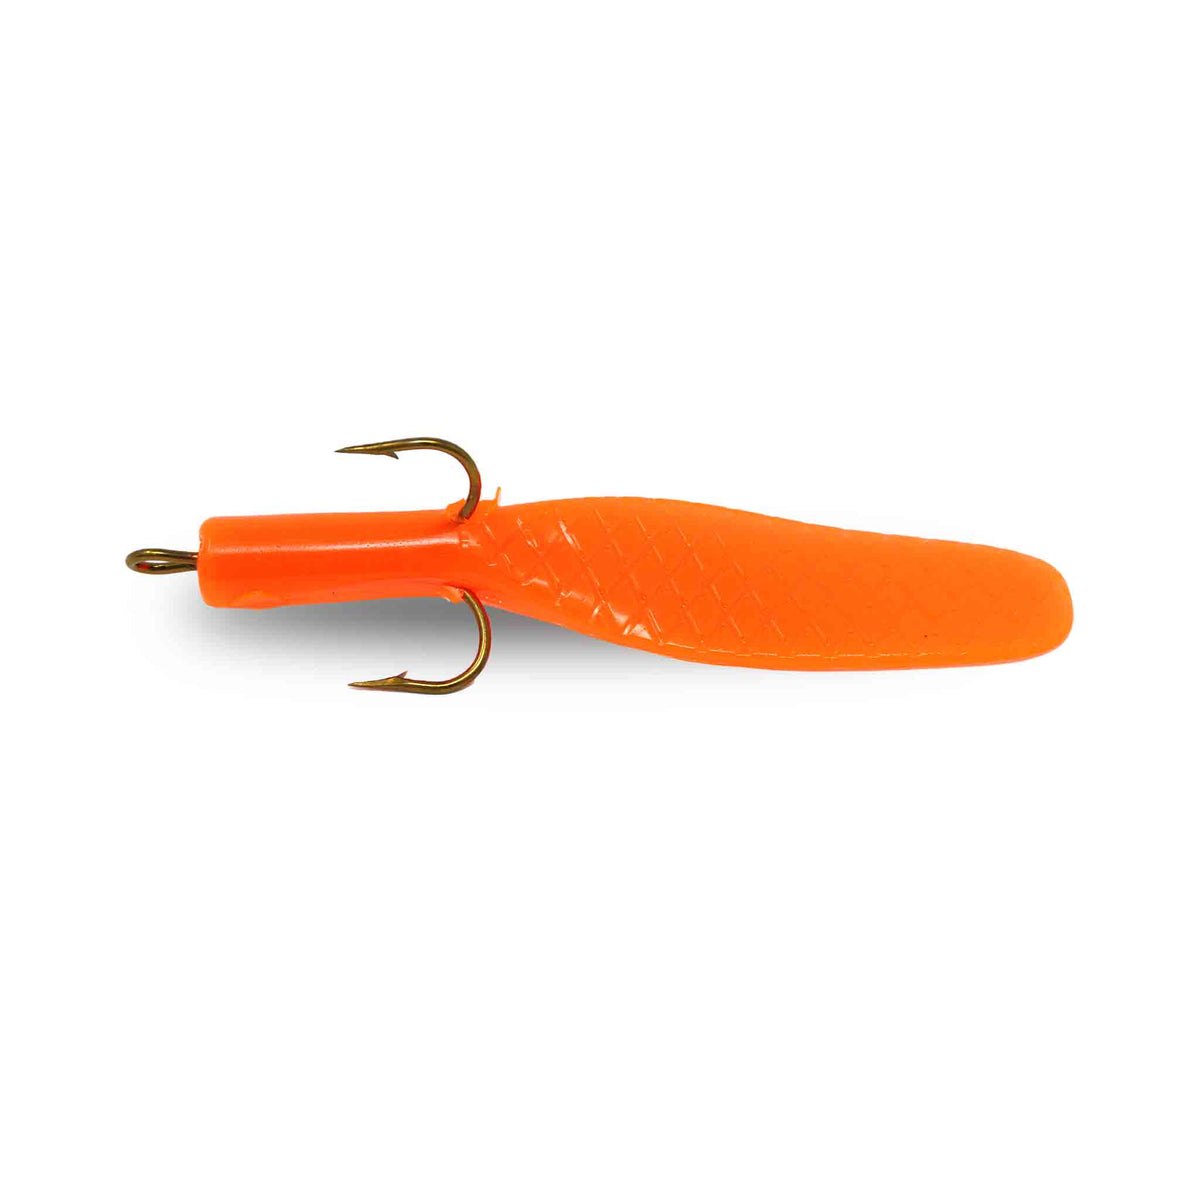 Beaver's Baits Baby Beaver XL Tail Orange Replacement Tails